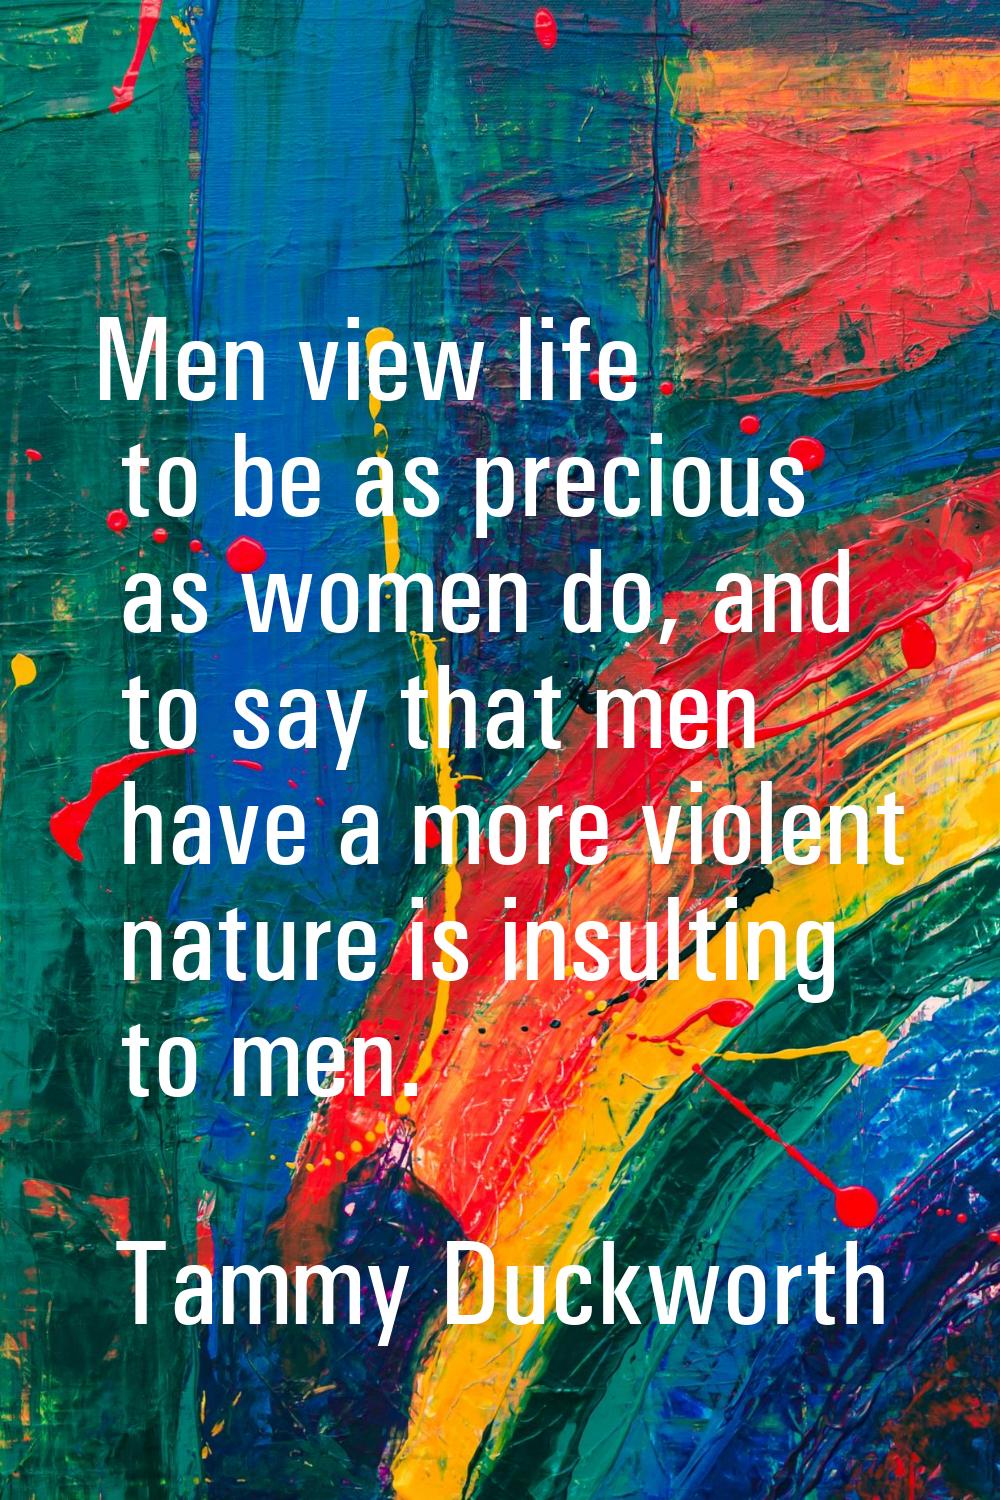 Men view life to be as precious as women do, and to say that men have a more violent nature is insu